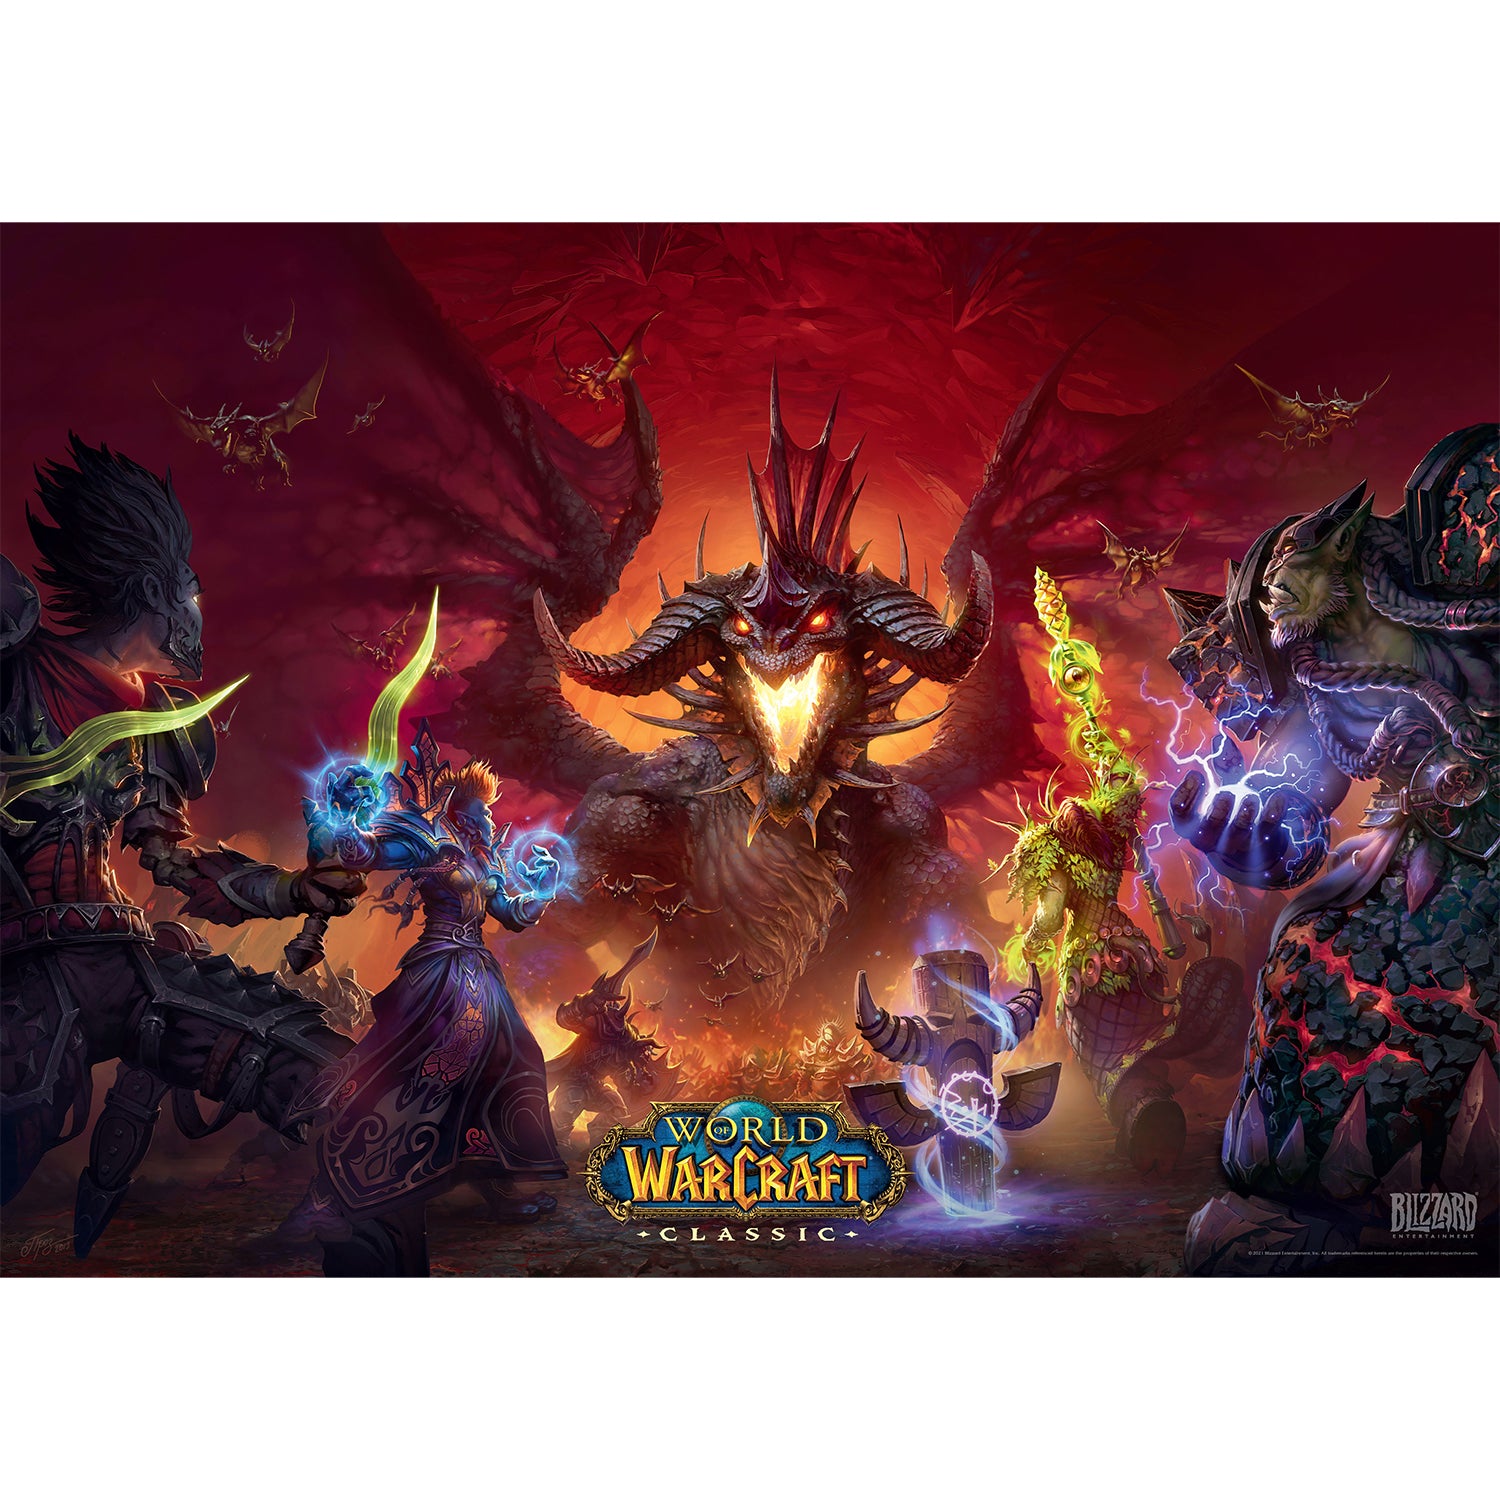 World of Warcraft: Classic Onyxia 1000 Piece Puzzle - Flat View